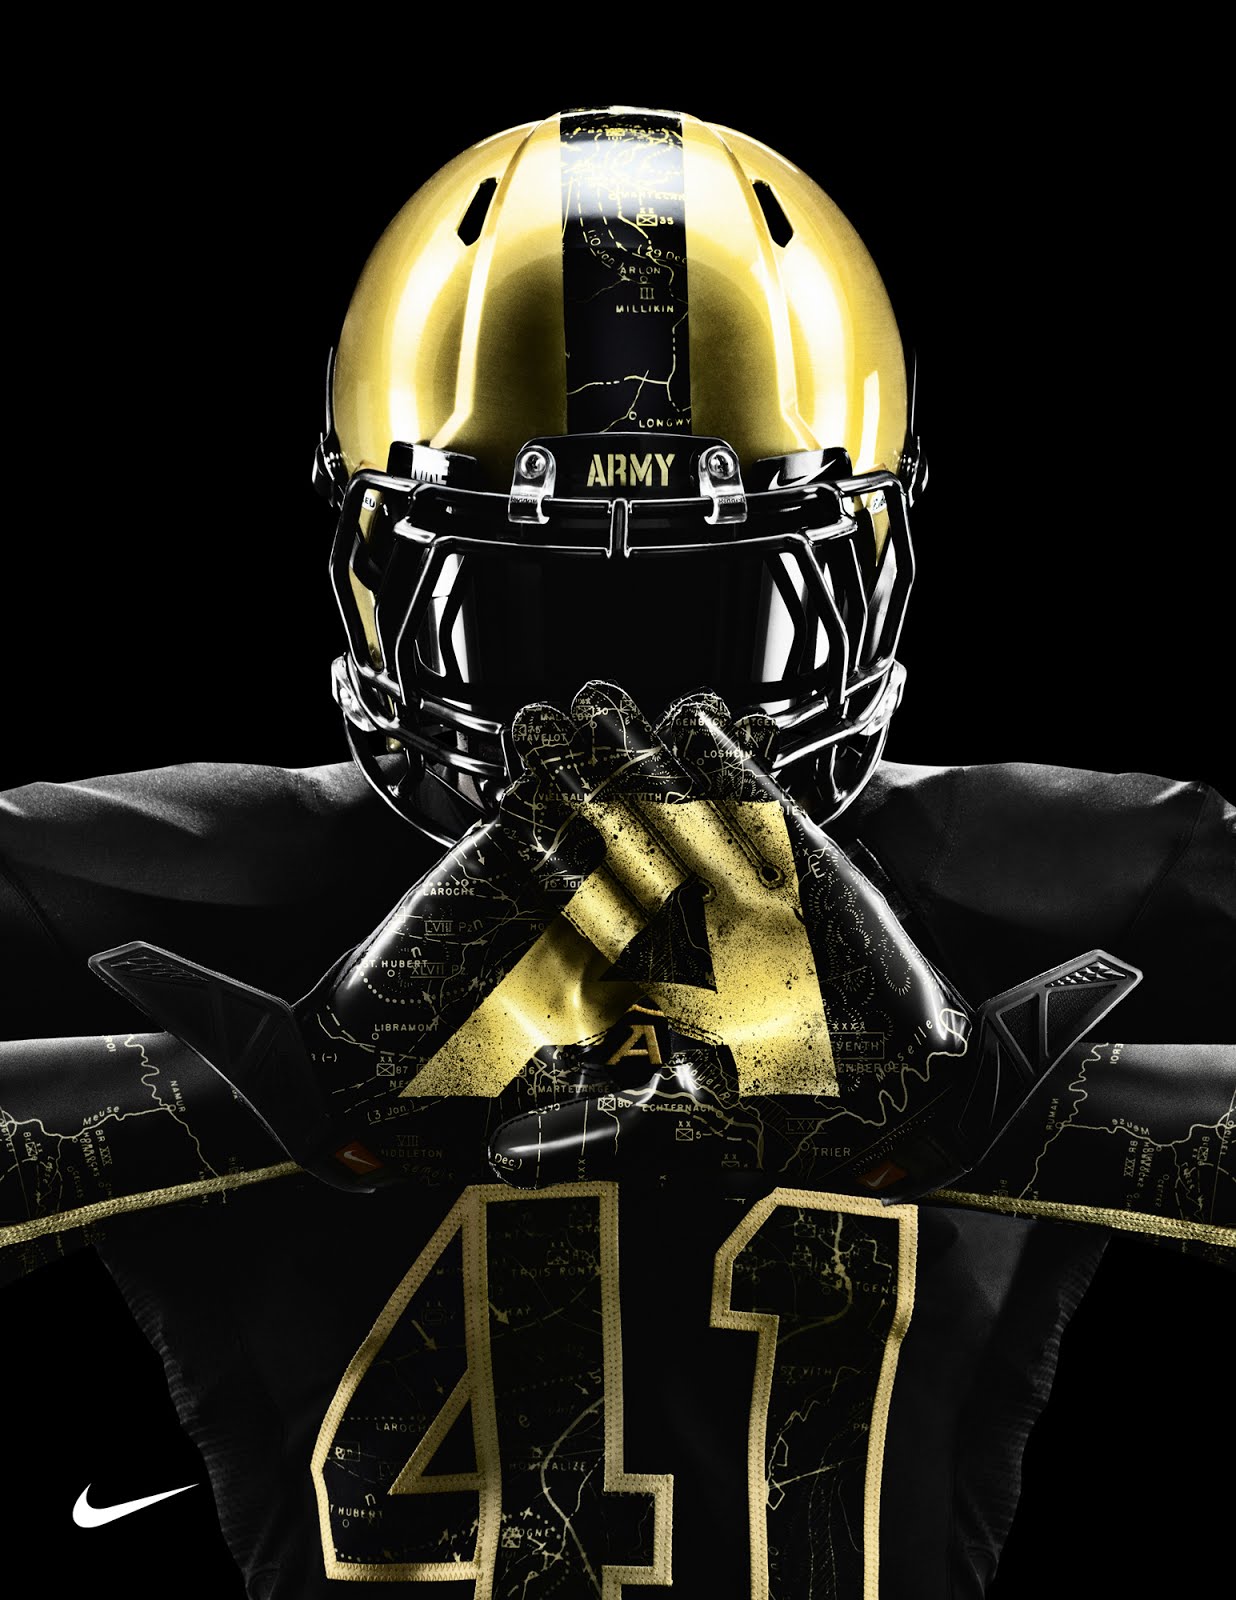 The just revealed Army and Navy football uniforms by Nike have some